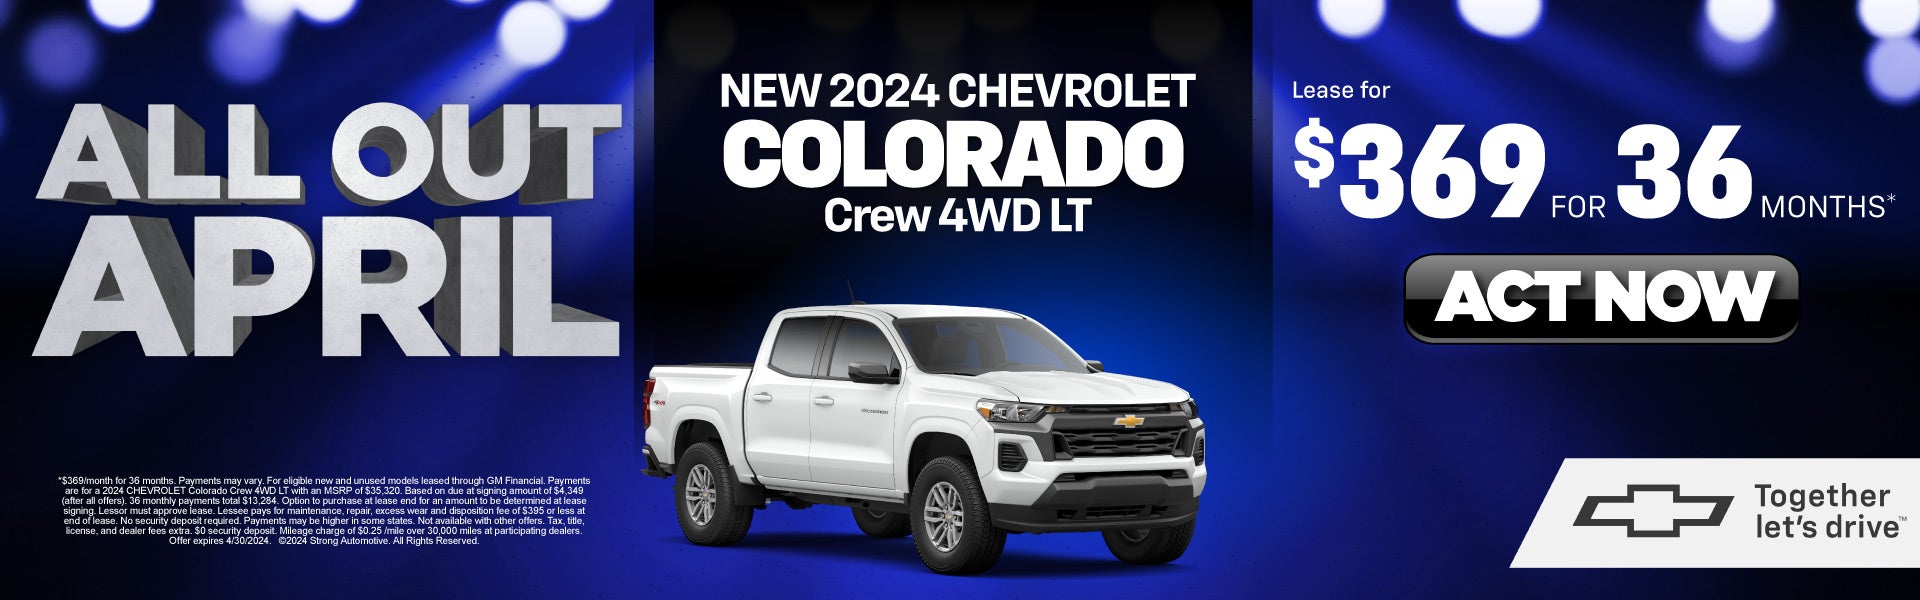 2024 chevy colorado lease for $369 for 36 mos. act now